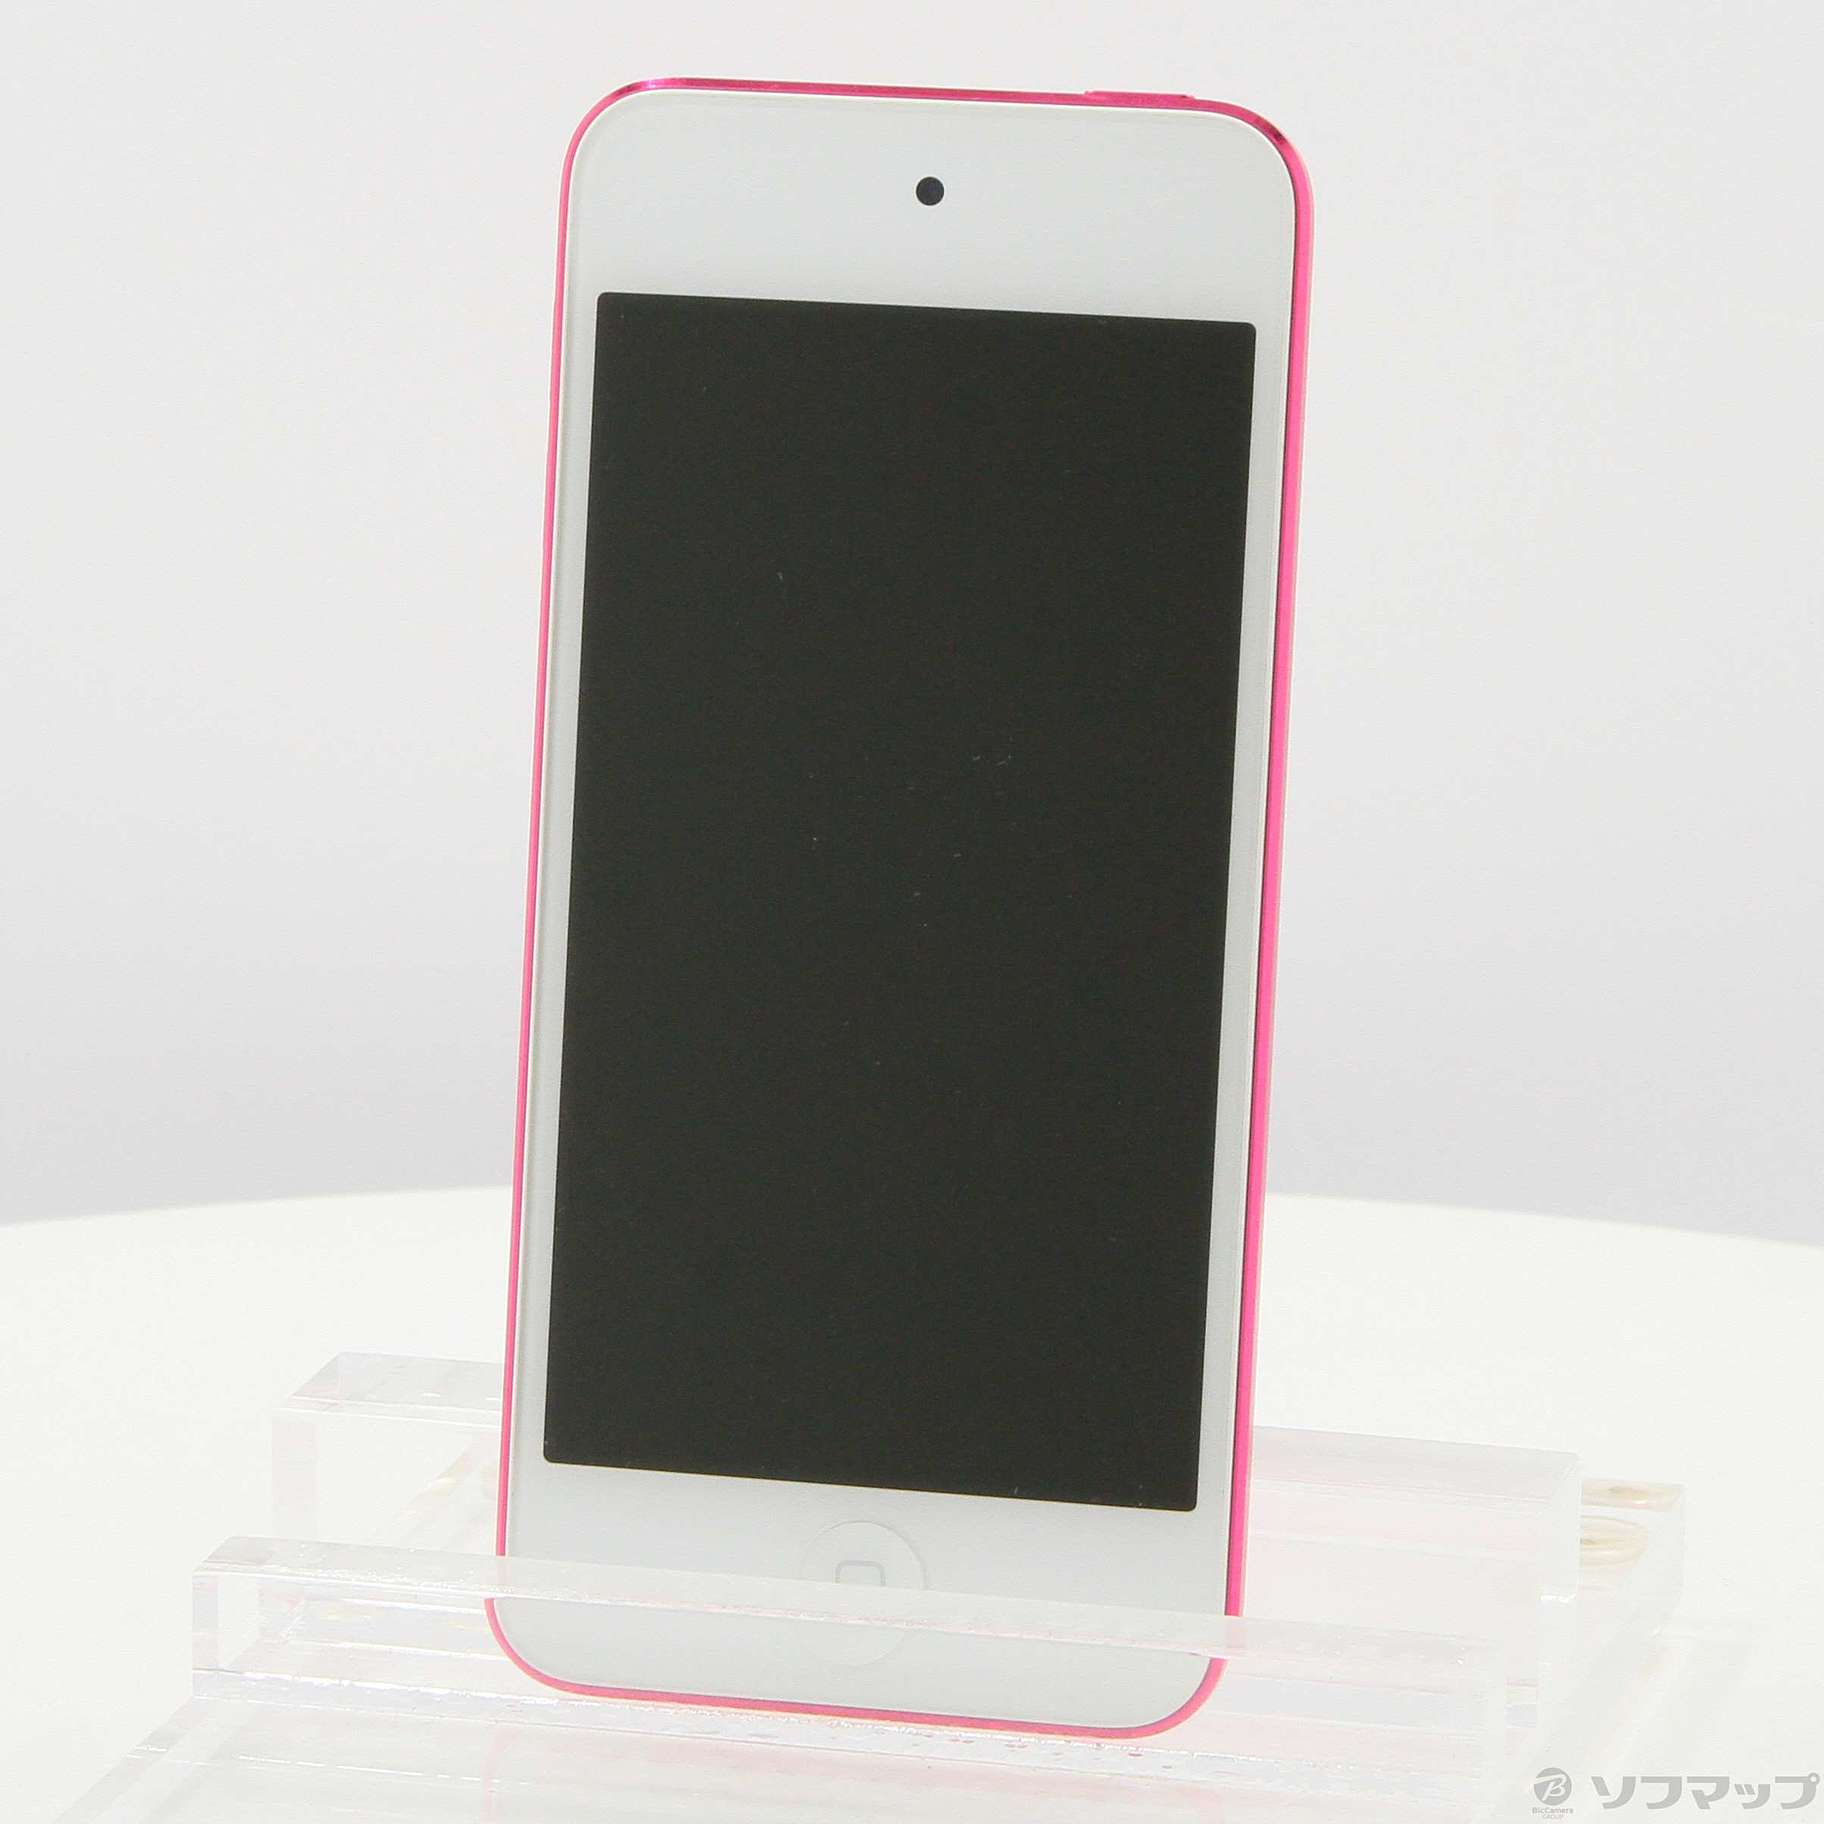 iPod touch 6世代 64GB ピンク www.krzysztofbialy.com